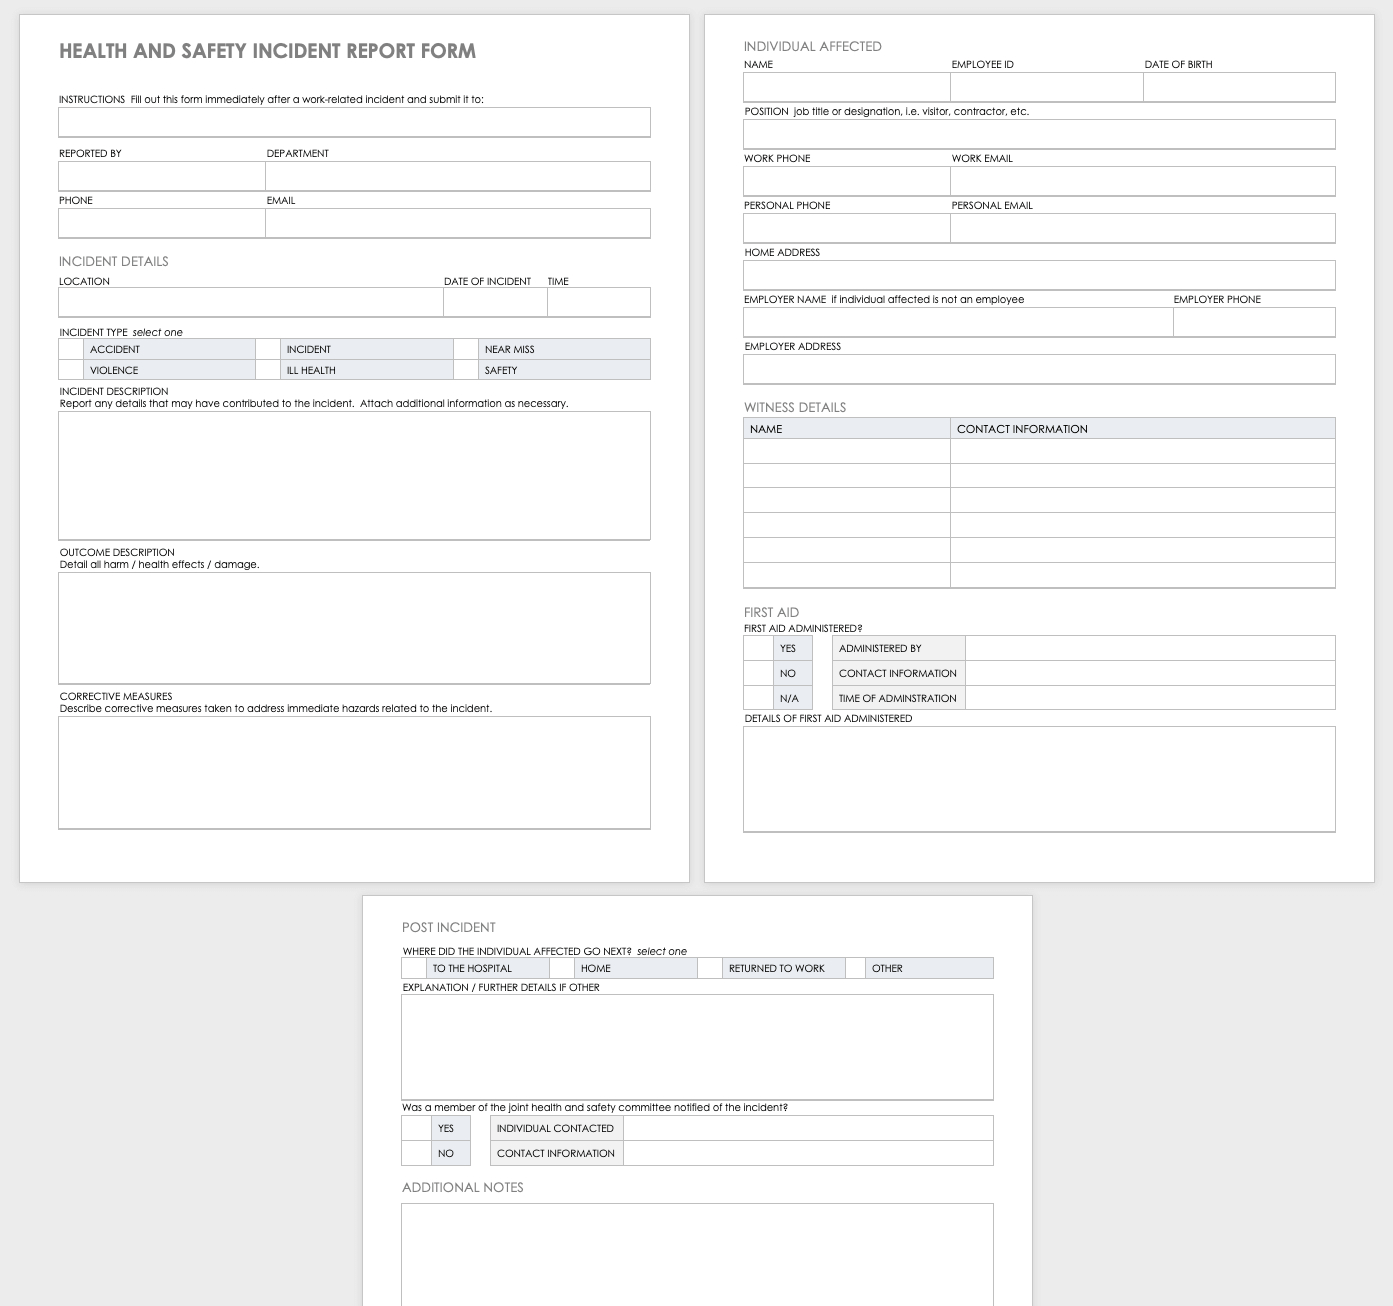 Free Workplace Accident Report Templates | Smartsheet Pertaining To Health And Safety Incident Report Form Template